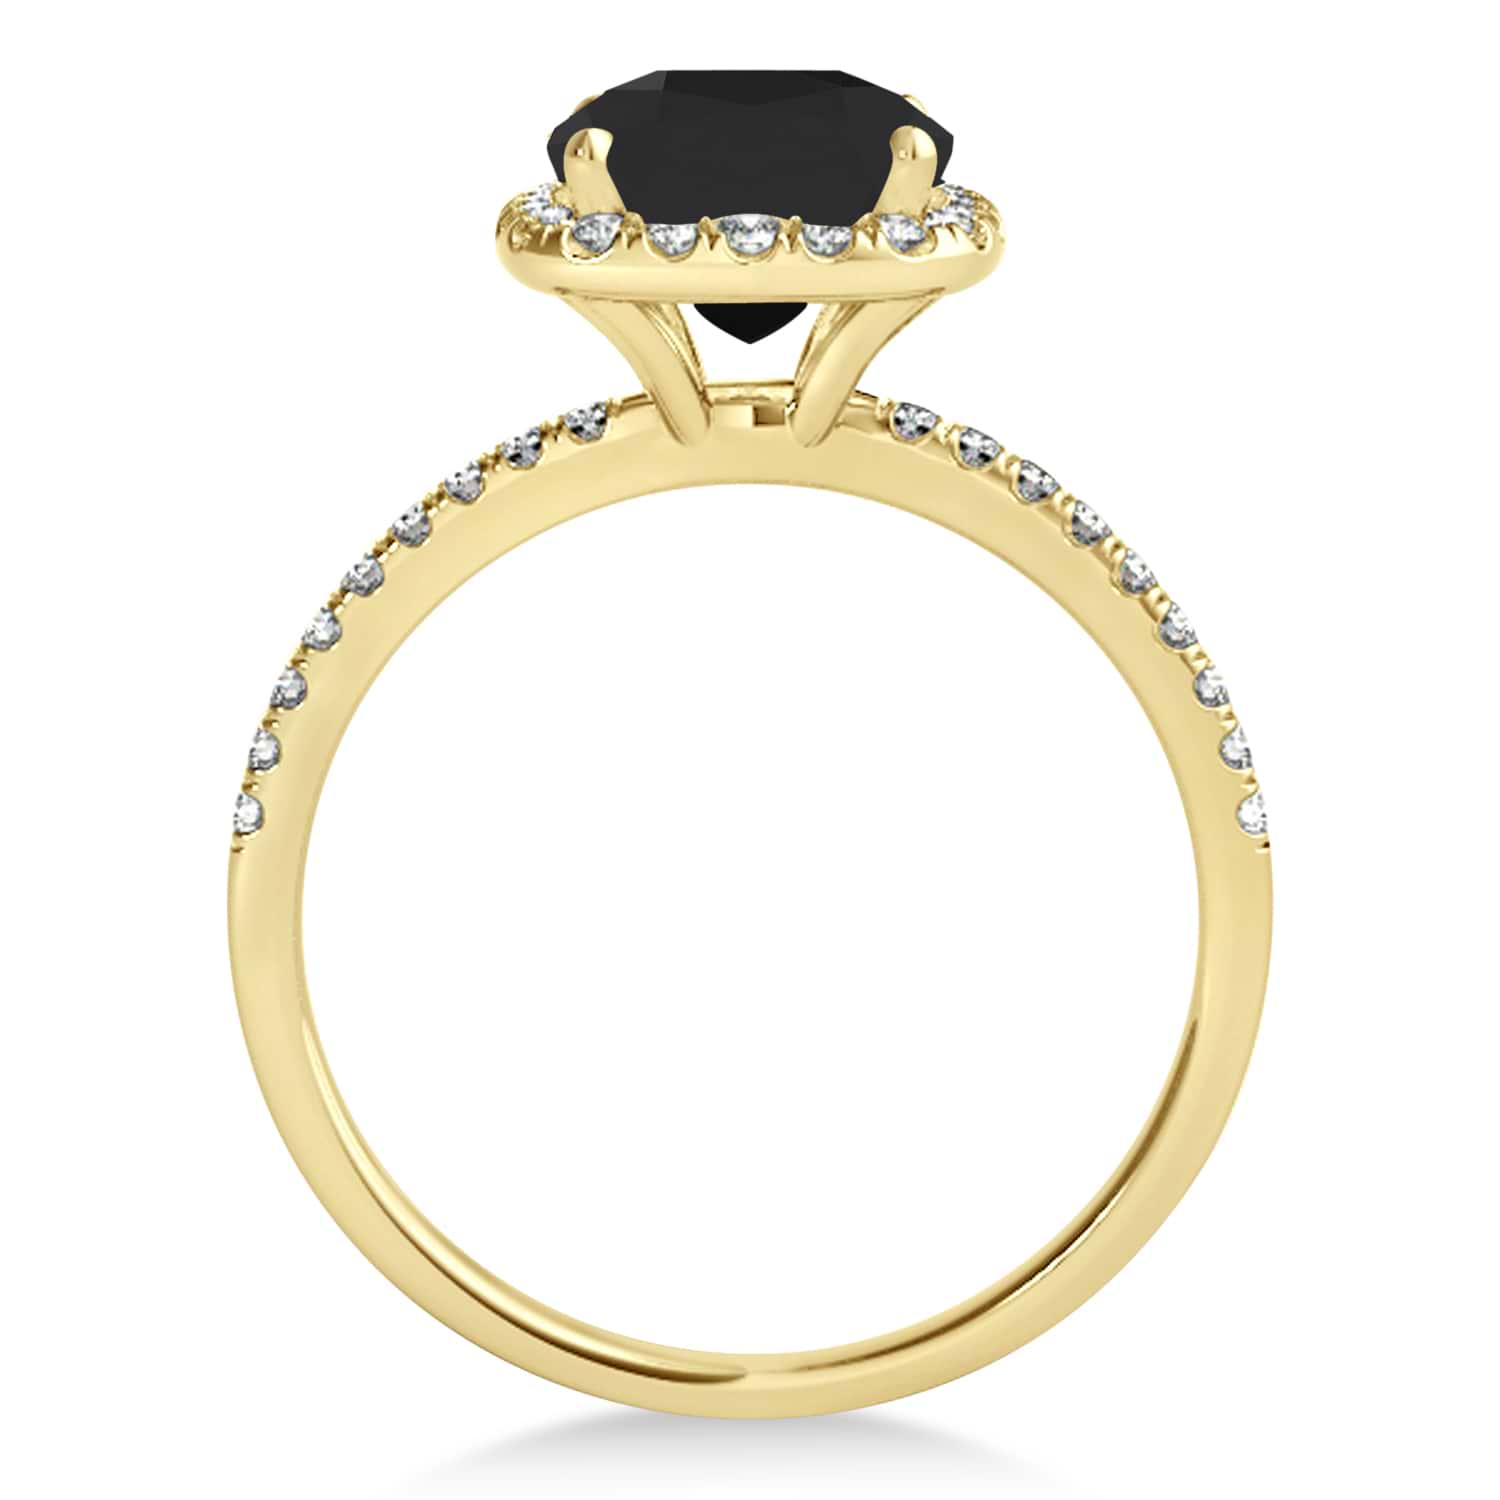 Cushion Black Diamond Halo Engagement Ring French Pave 14k Y. Gold 0.70ct